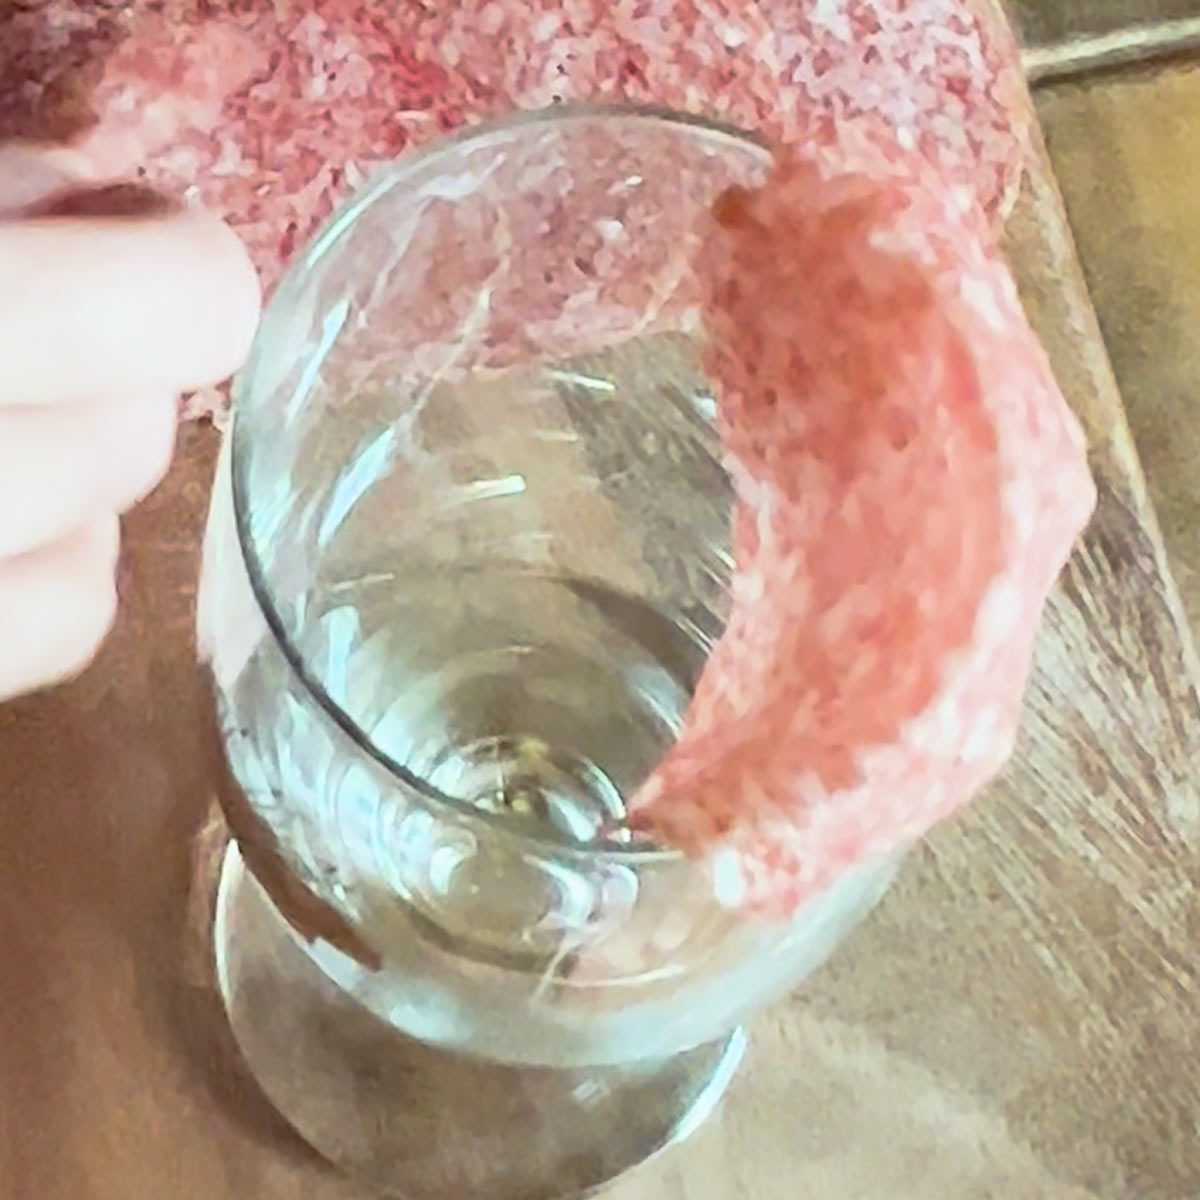 place first slice of salami over the glass